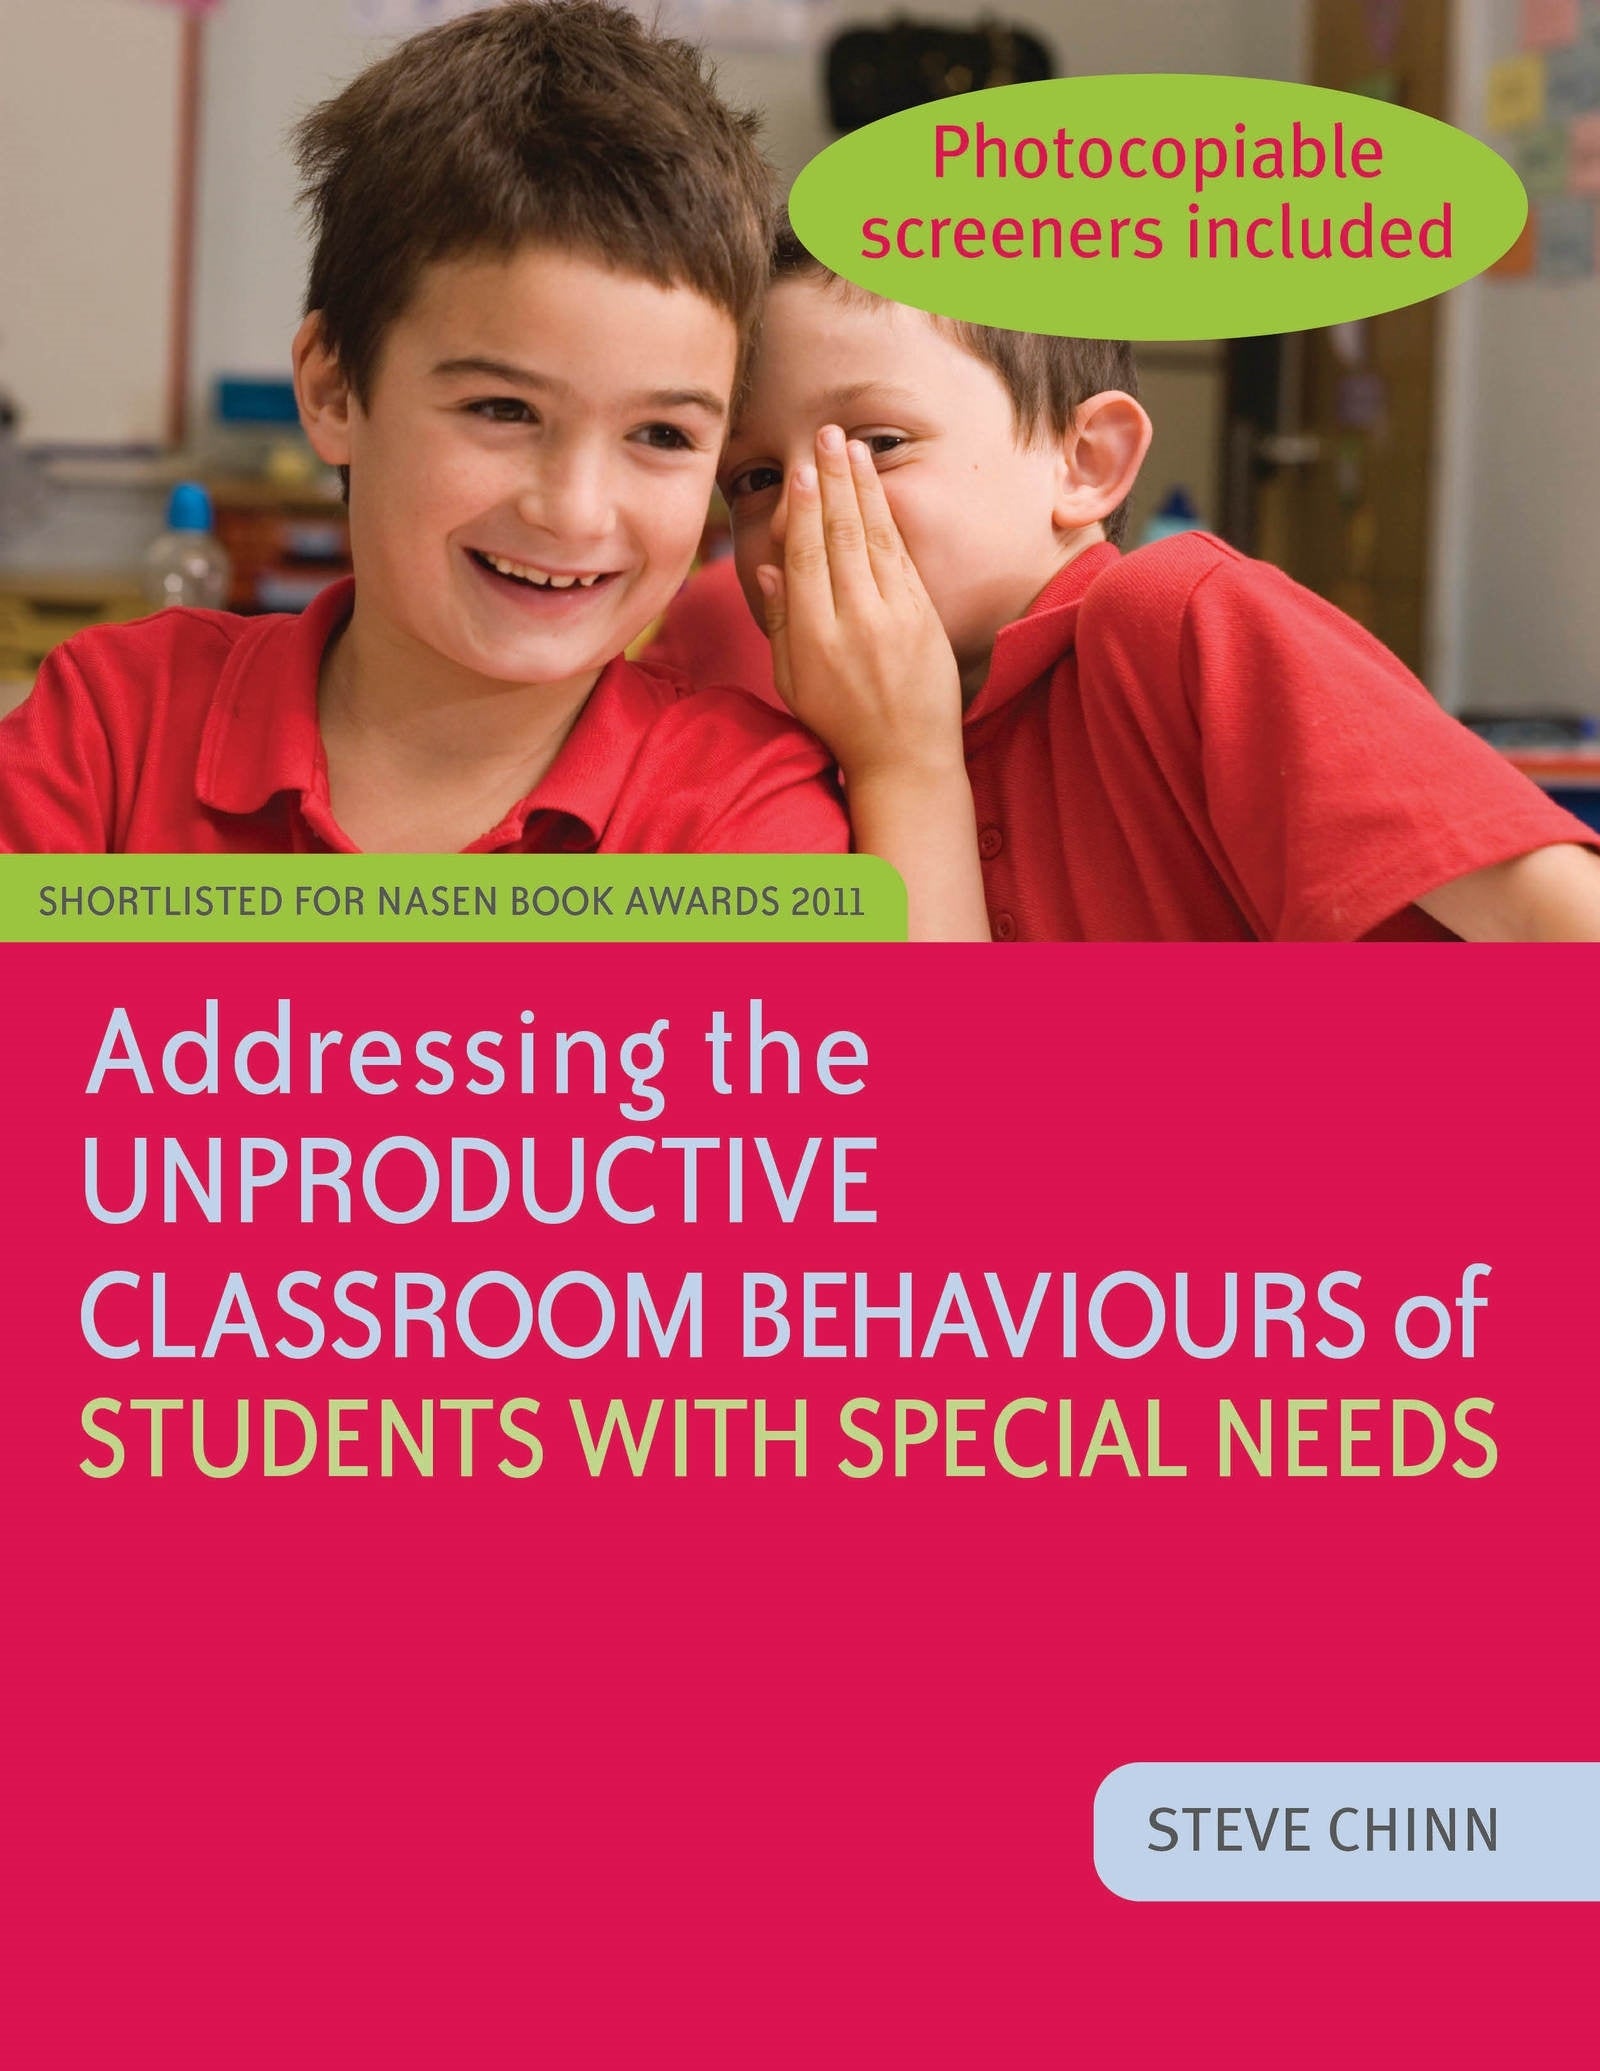 Addressing the Unproductive Classroom Behaviours of Students with Special Needs by Steve Chinn